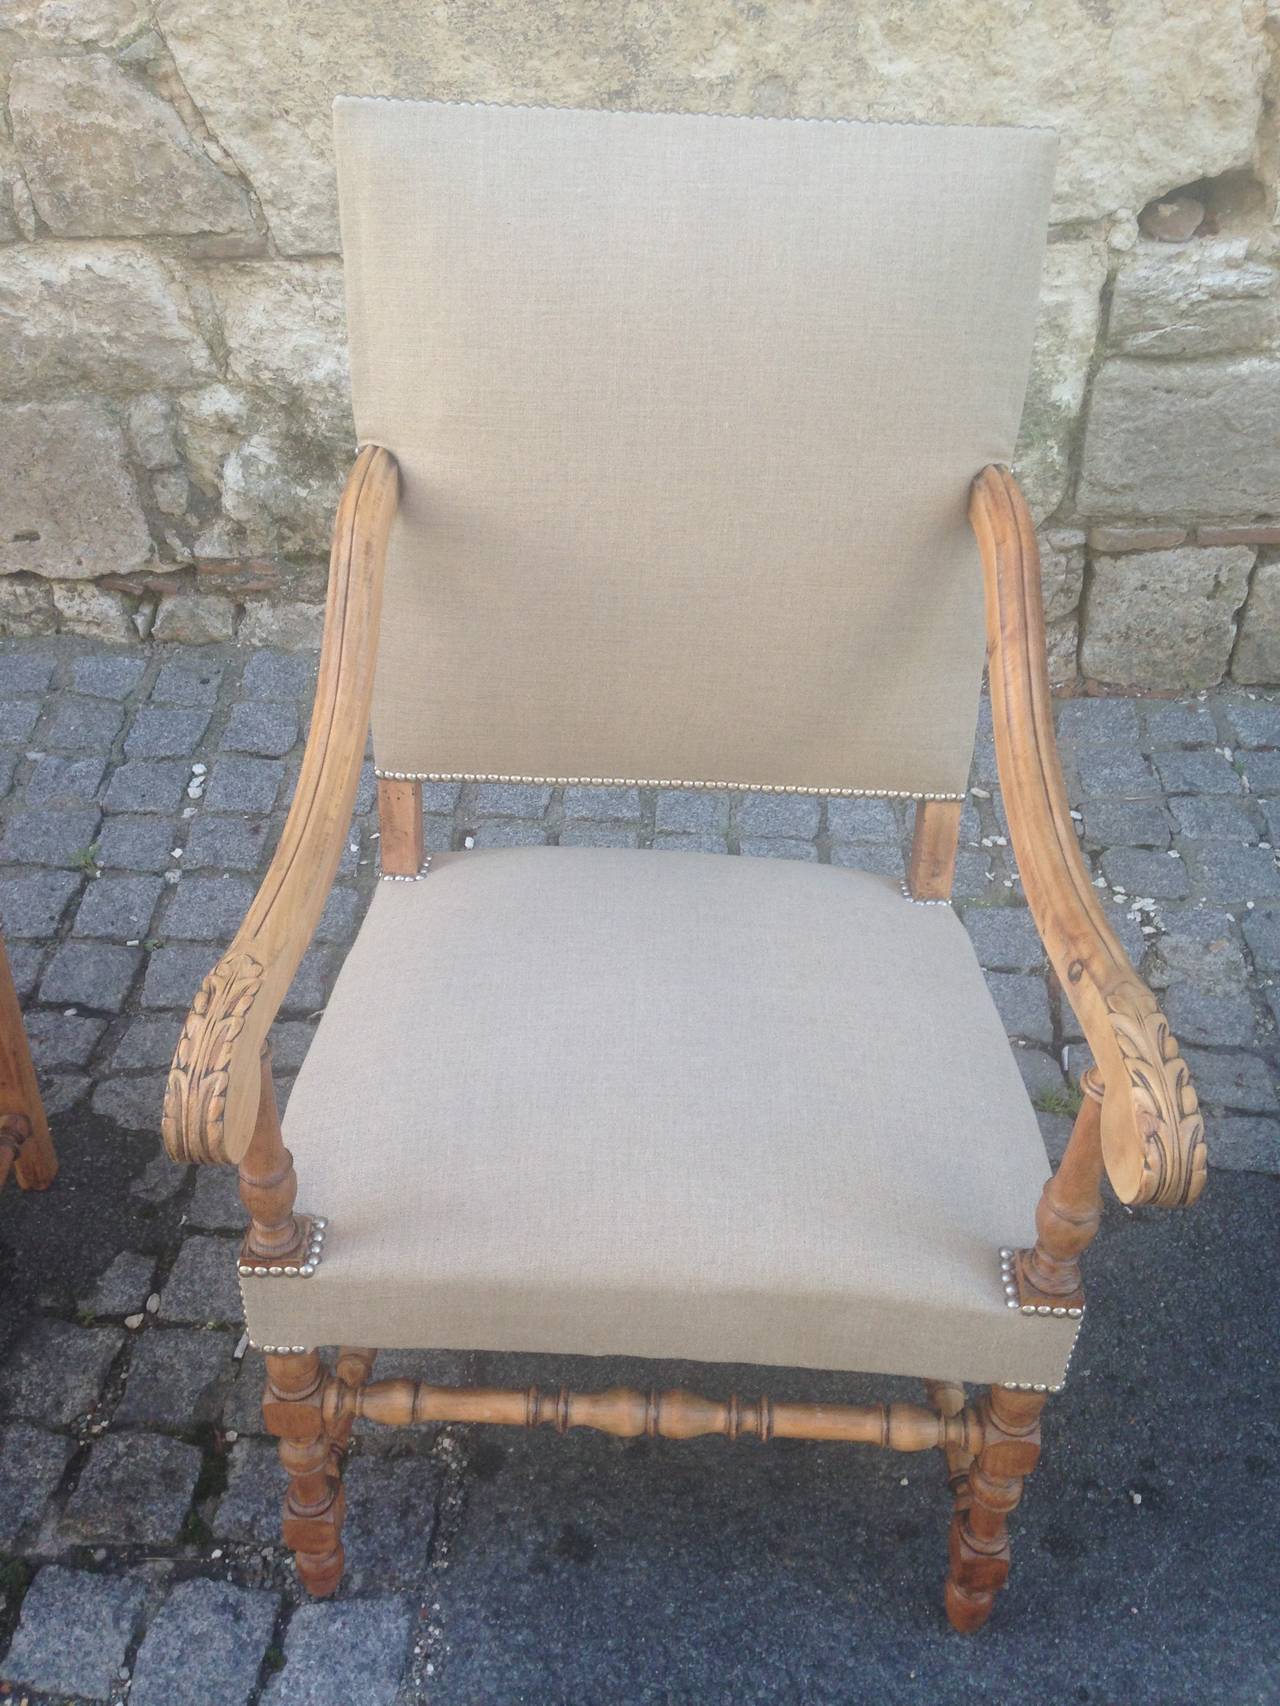 We found these marvellous chairs outside St. Émilion, but in tattered rose-colored velvet and in old varnish surface. But thanks to our marvellous French atelier, they have been sanded, waxed to a soft glow, and reupholstered in antique French